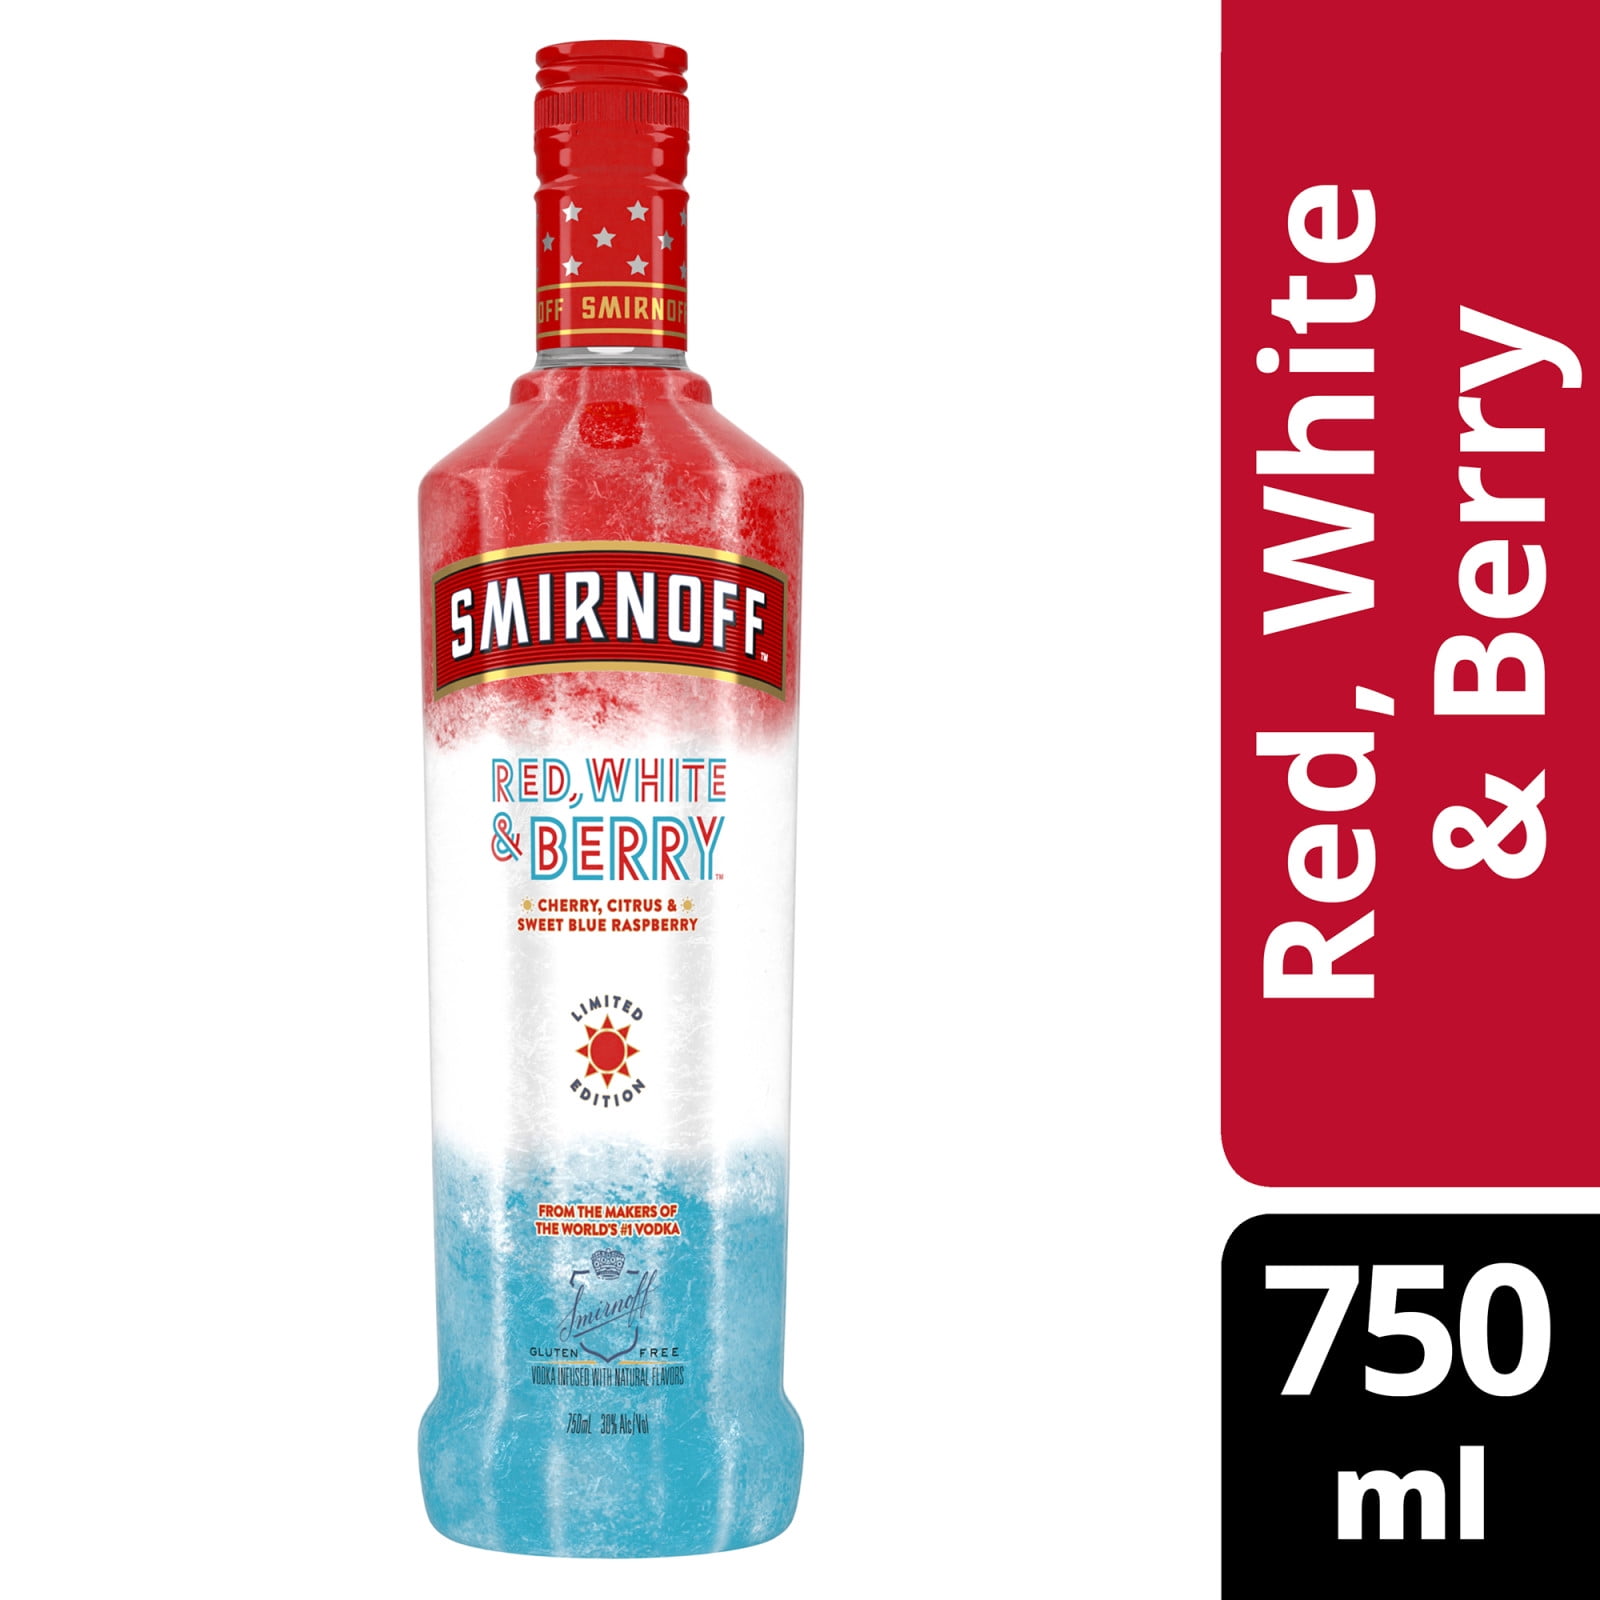 Smirnoff Red, White & Berry (Vodka infused with Natural Flavors), 750 ml,  30% ABV